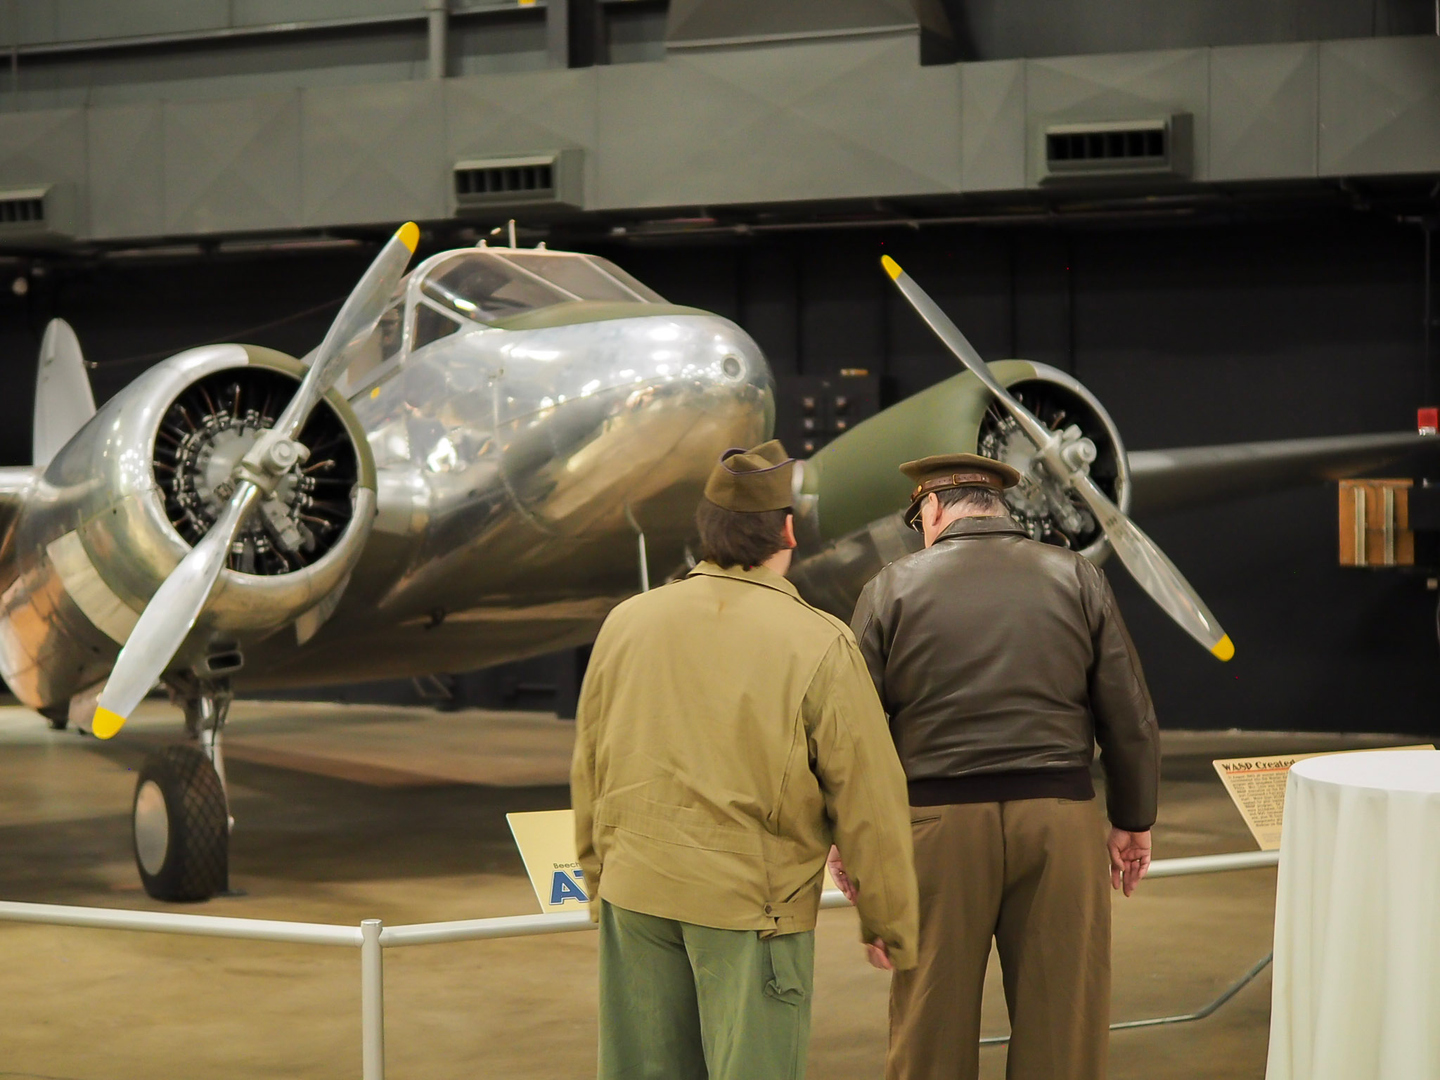 Viewers from the <em>Masters of the Air</em> exclusive screening take in one of the displays at the National Museum of the U.S. Air Force in Dayton, Ohio. Photo: Matthew VanEck for We Are The Mighty.